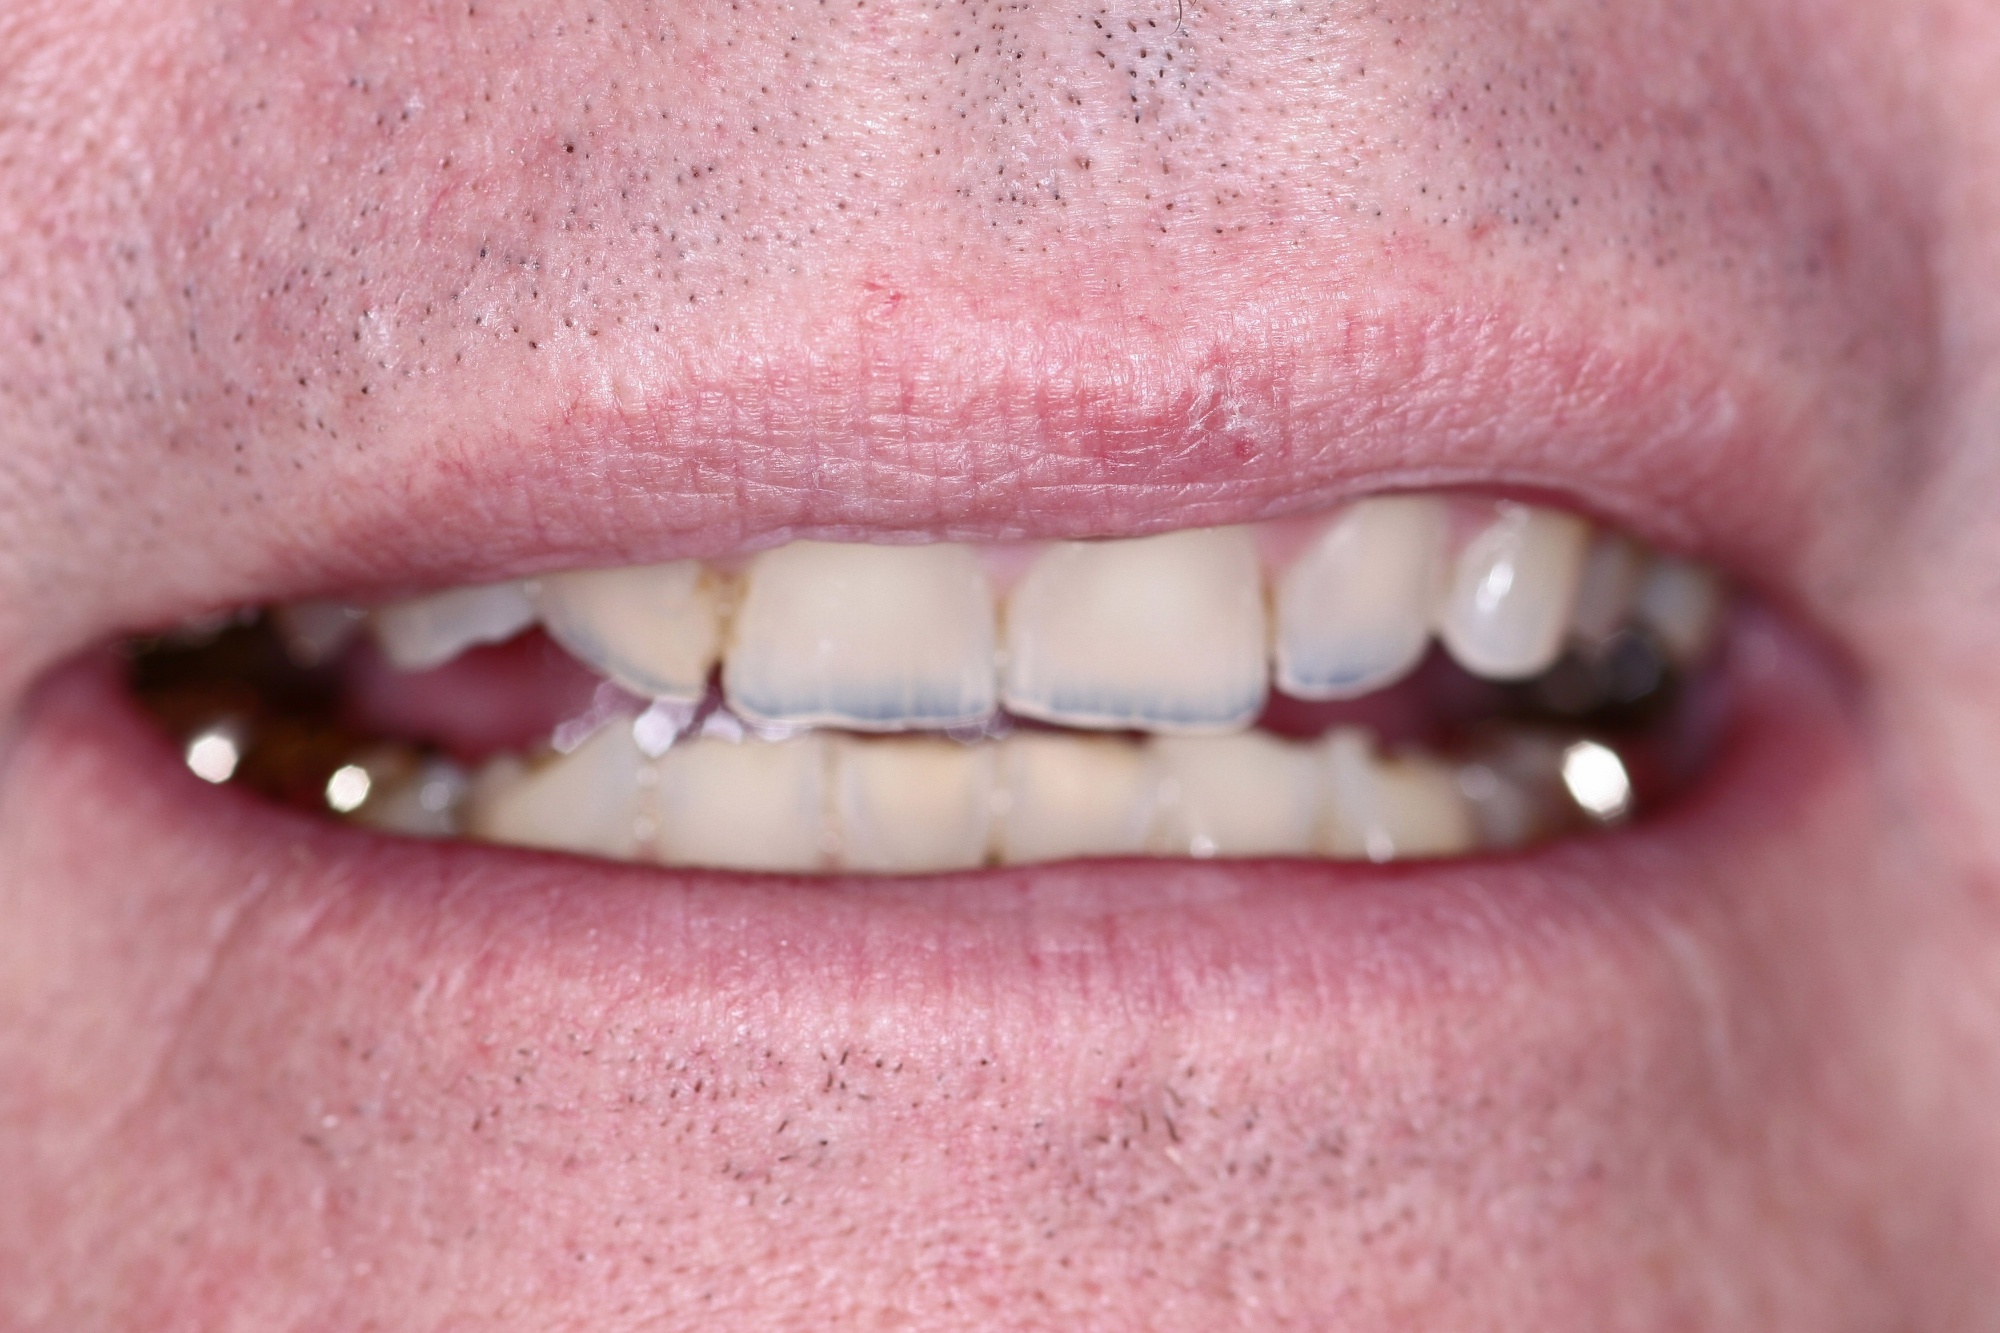 Steve's Smile Before Cosmetic Treatment